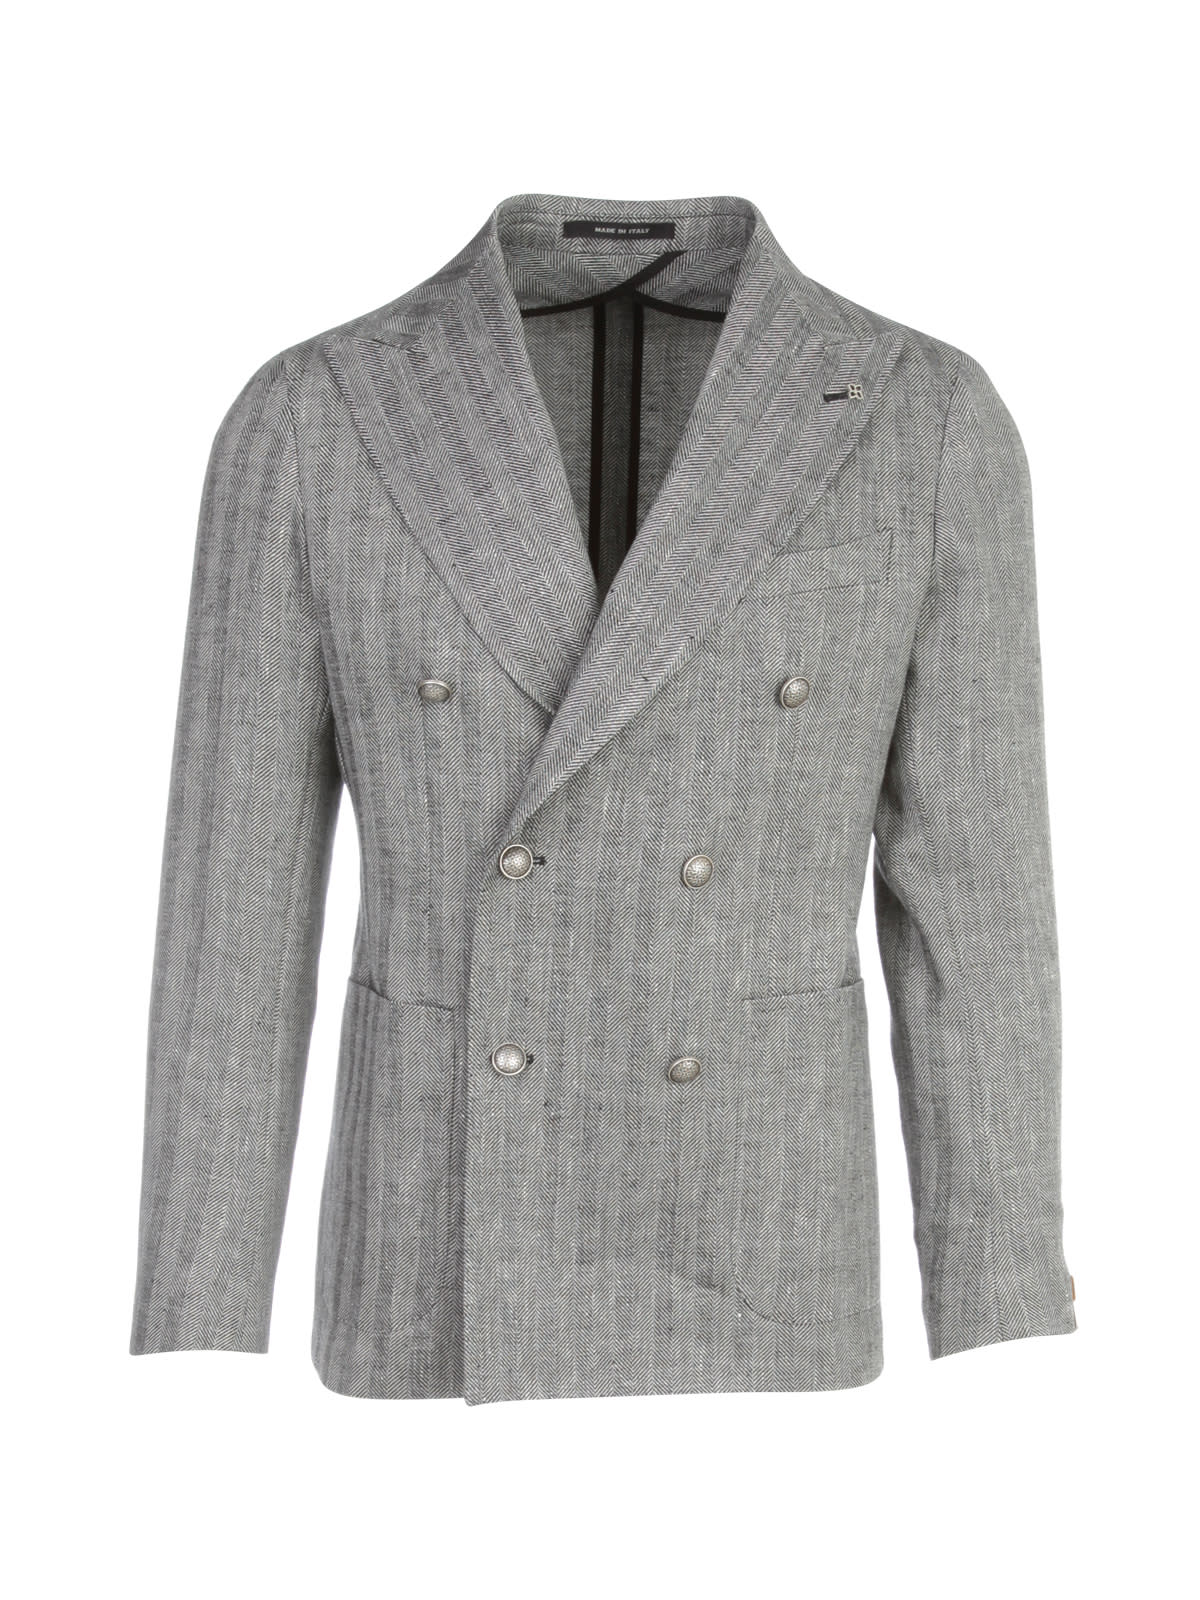 Tagliatore Wool Silk Double Breasted Jacket W/silver Buttons